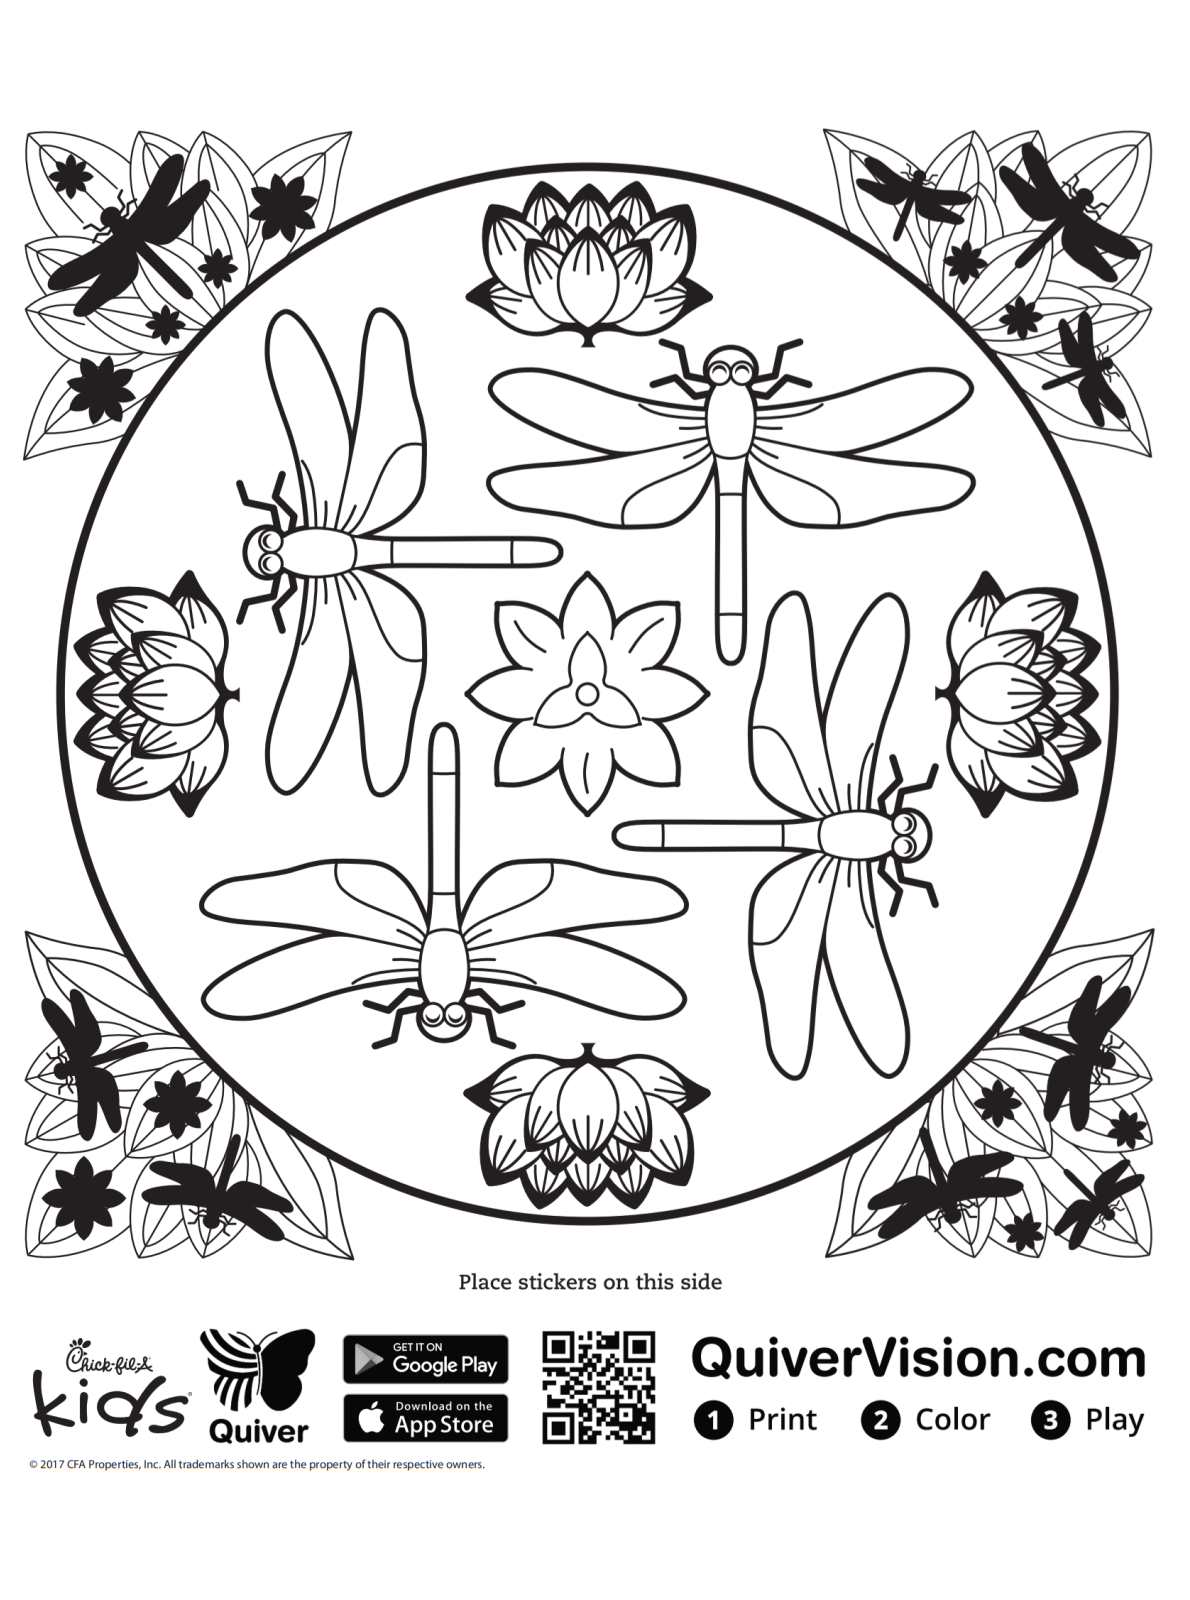 Kids-n-fun.com | Coloring page Quiver dragonfly